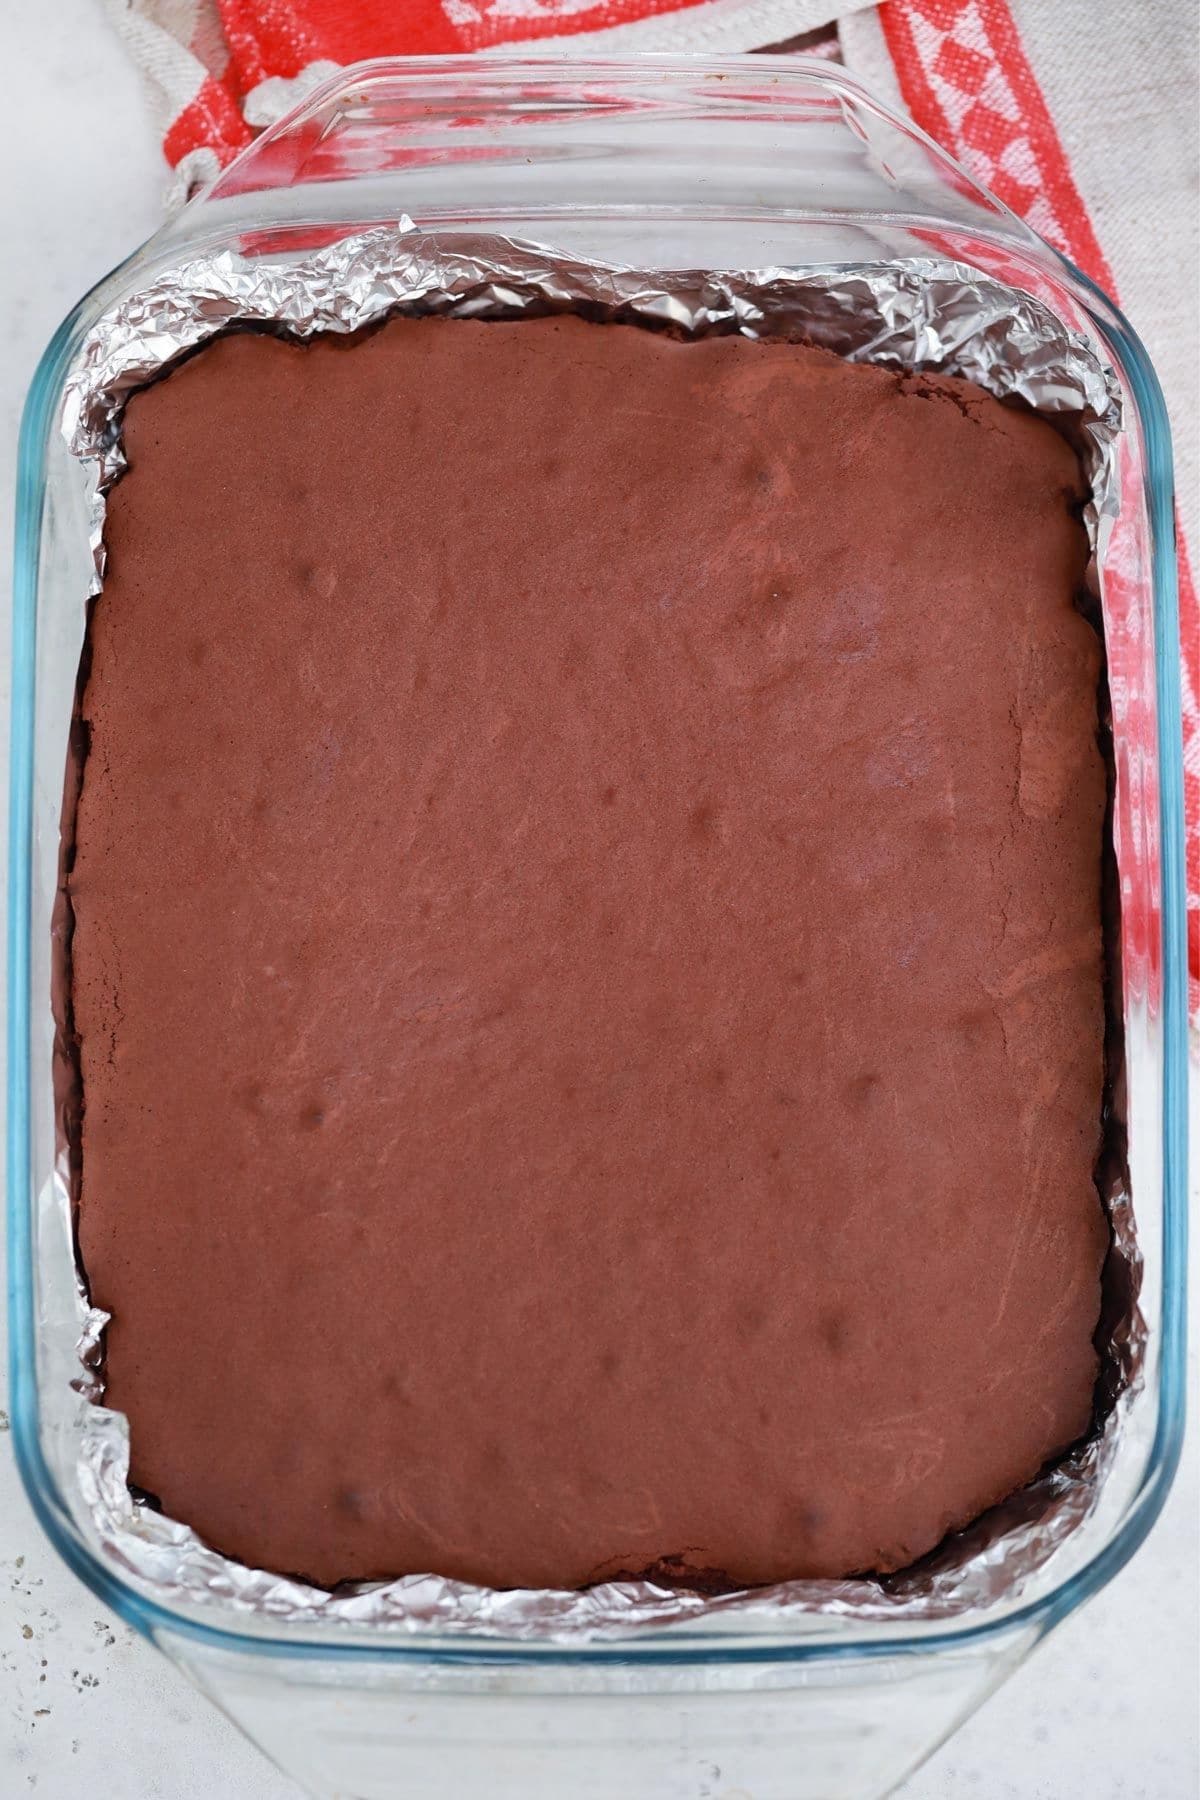 baked brownies on table with red and white napkin